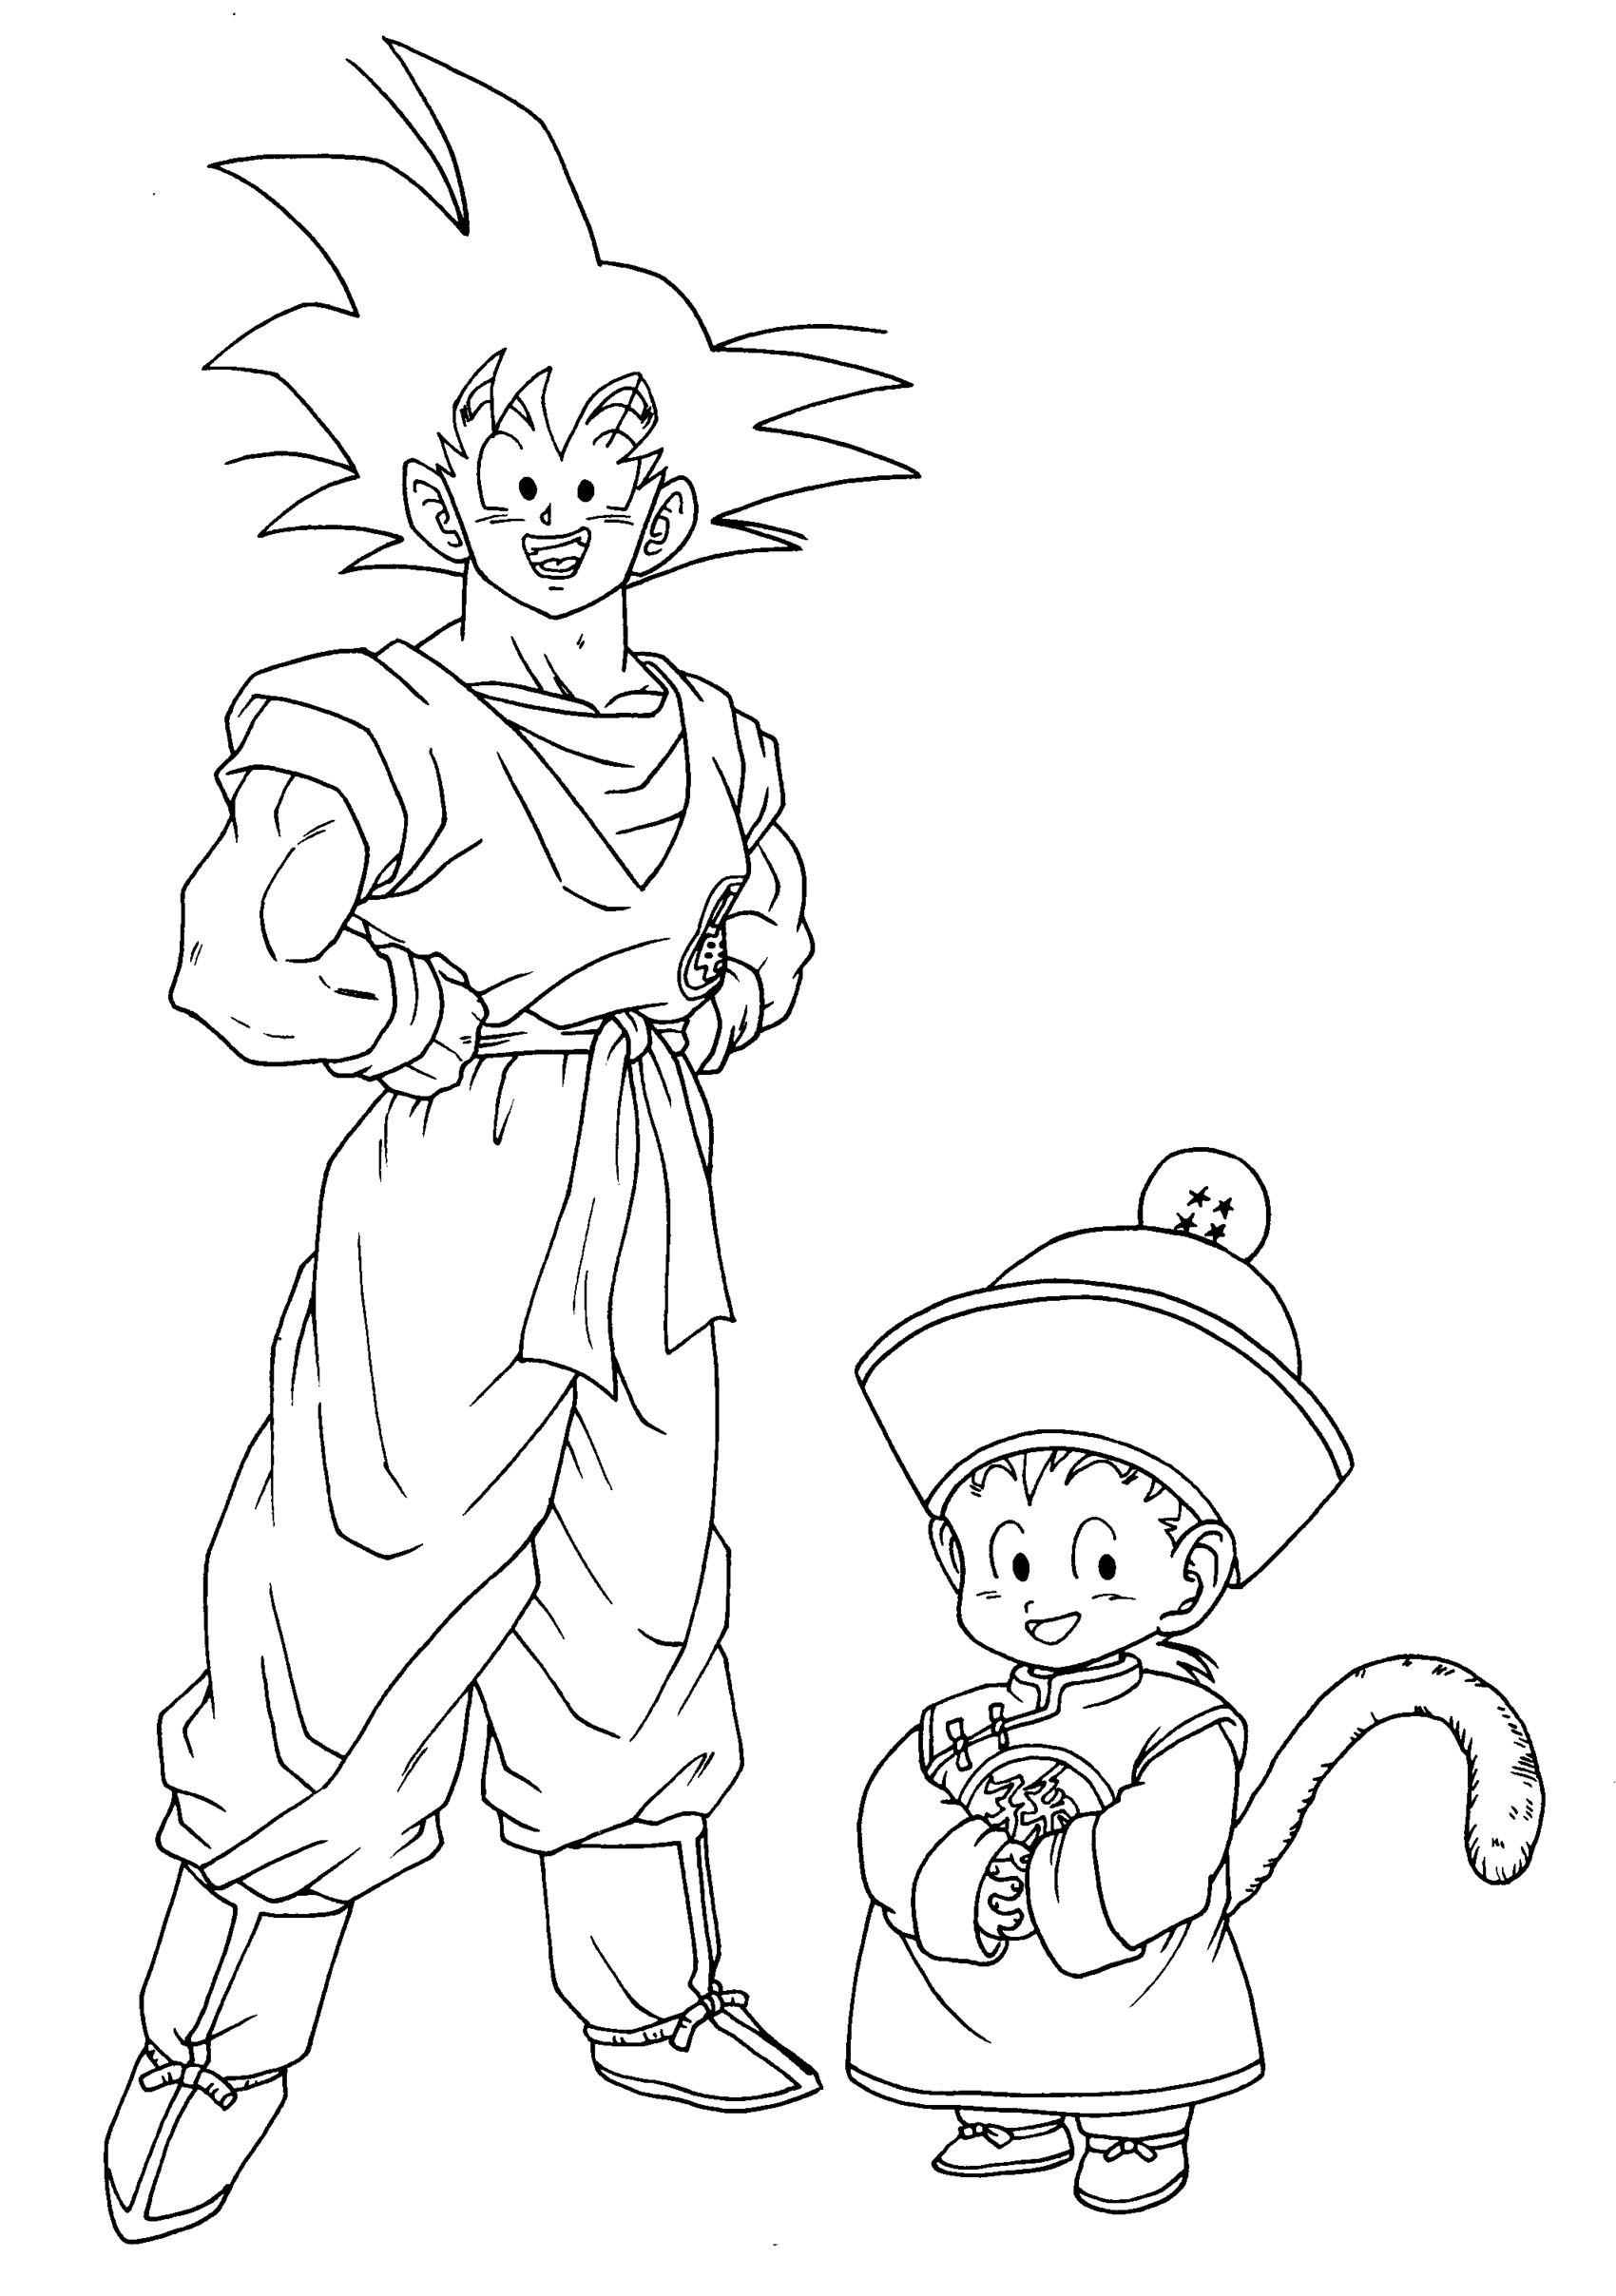 Dragon Ball Z coloring page with few details for kids : Songoku and Songohan